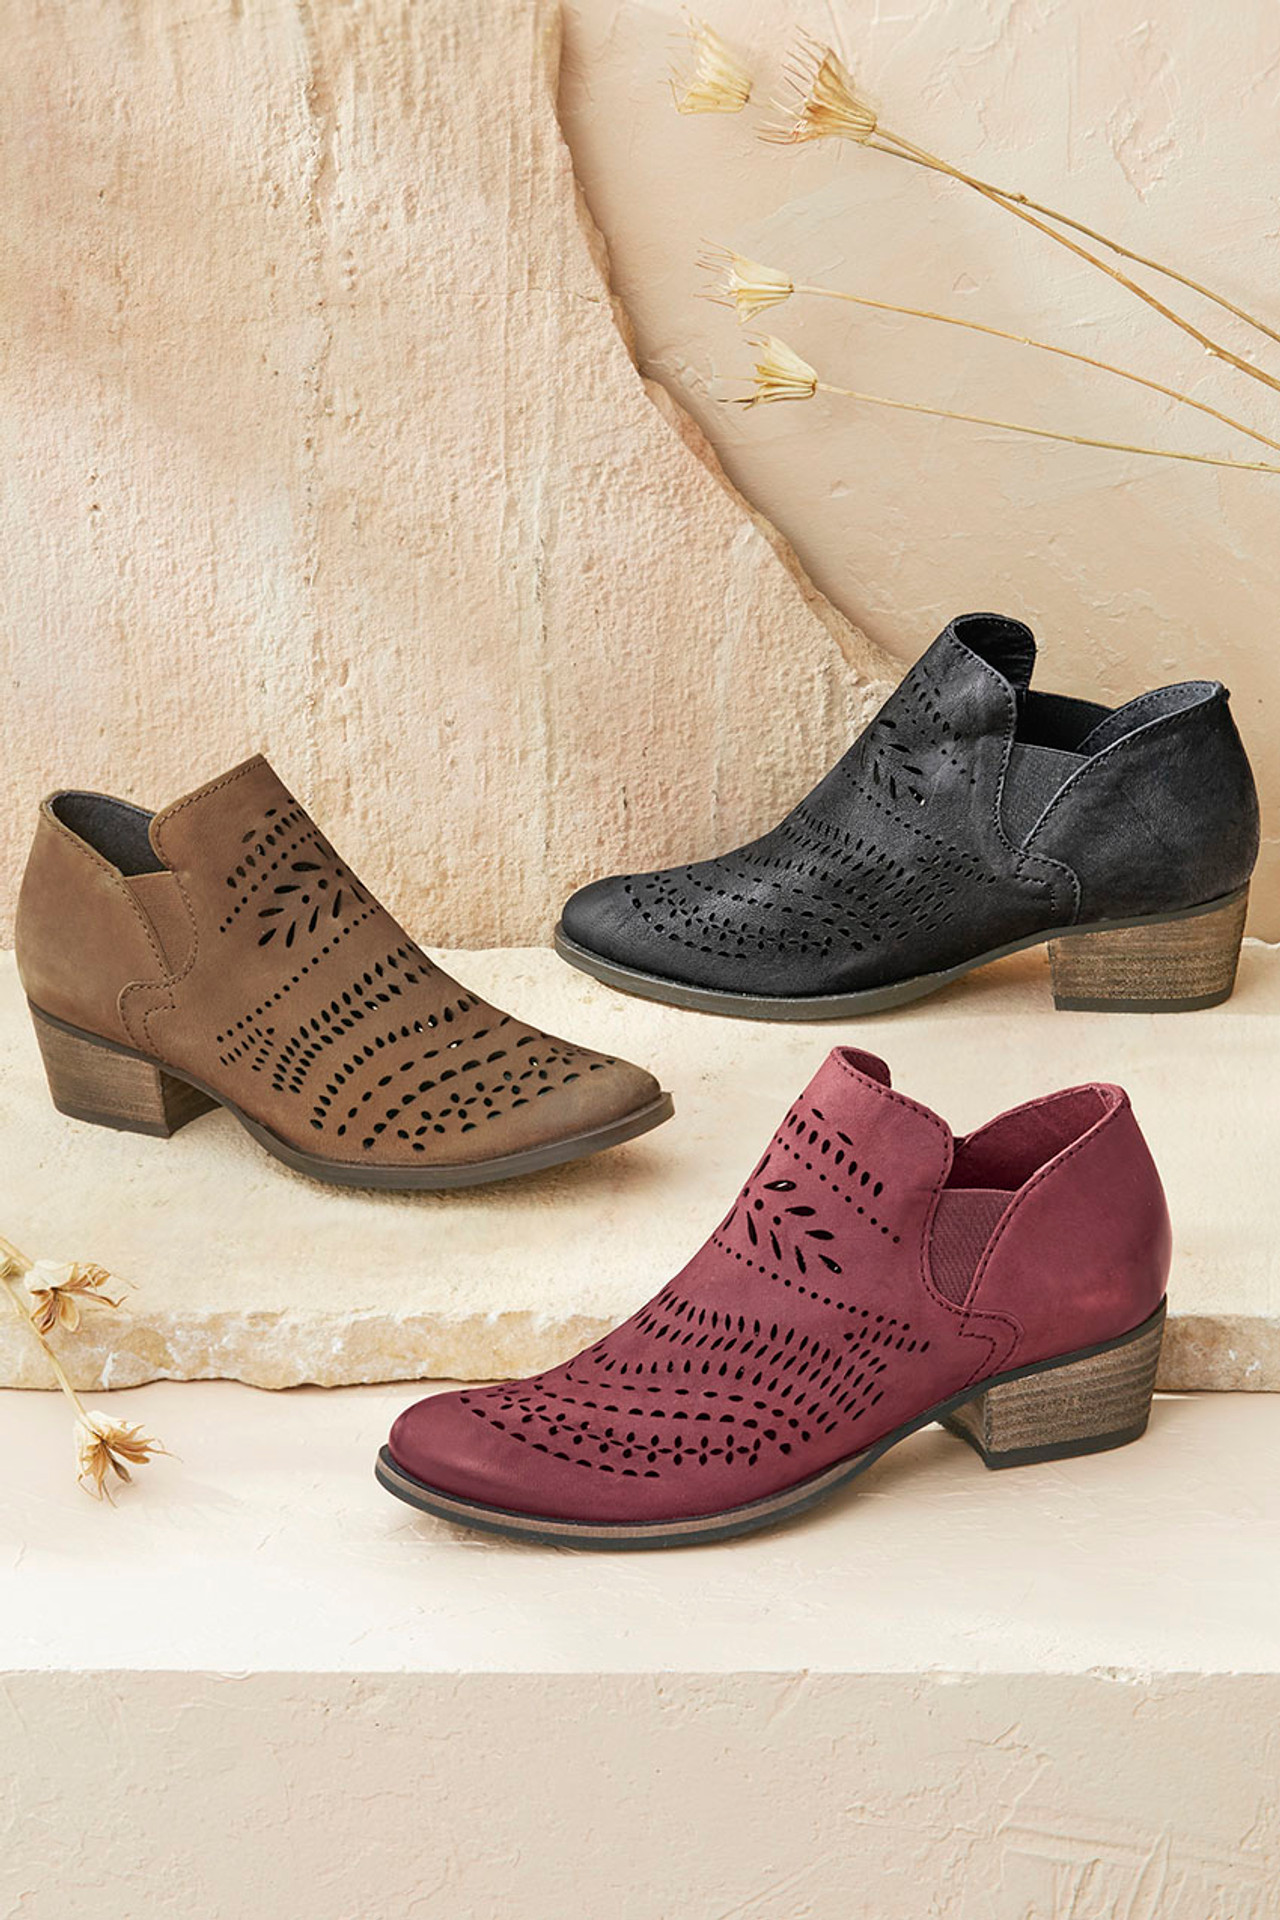 "Sun Valley" Leather Ankle Boots